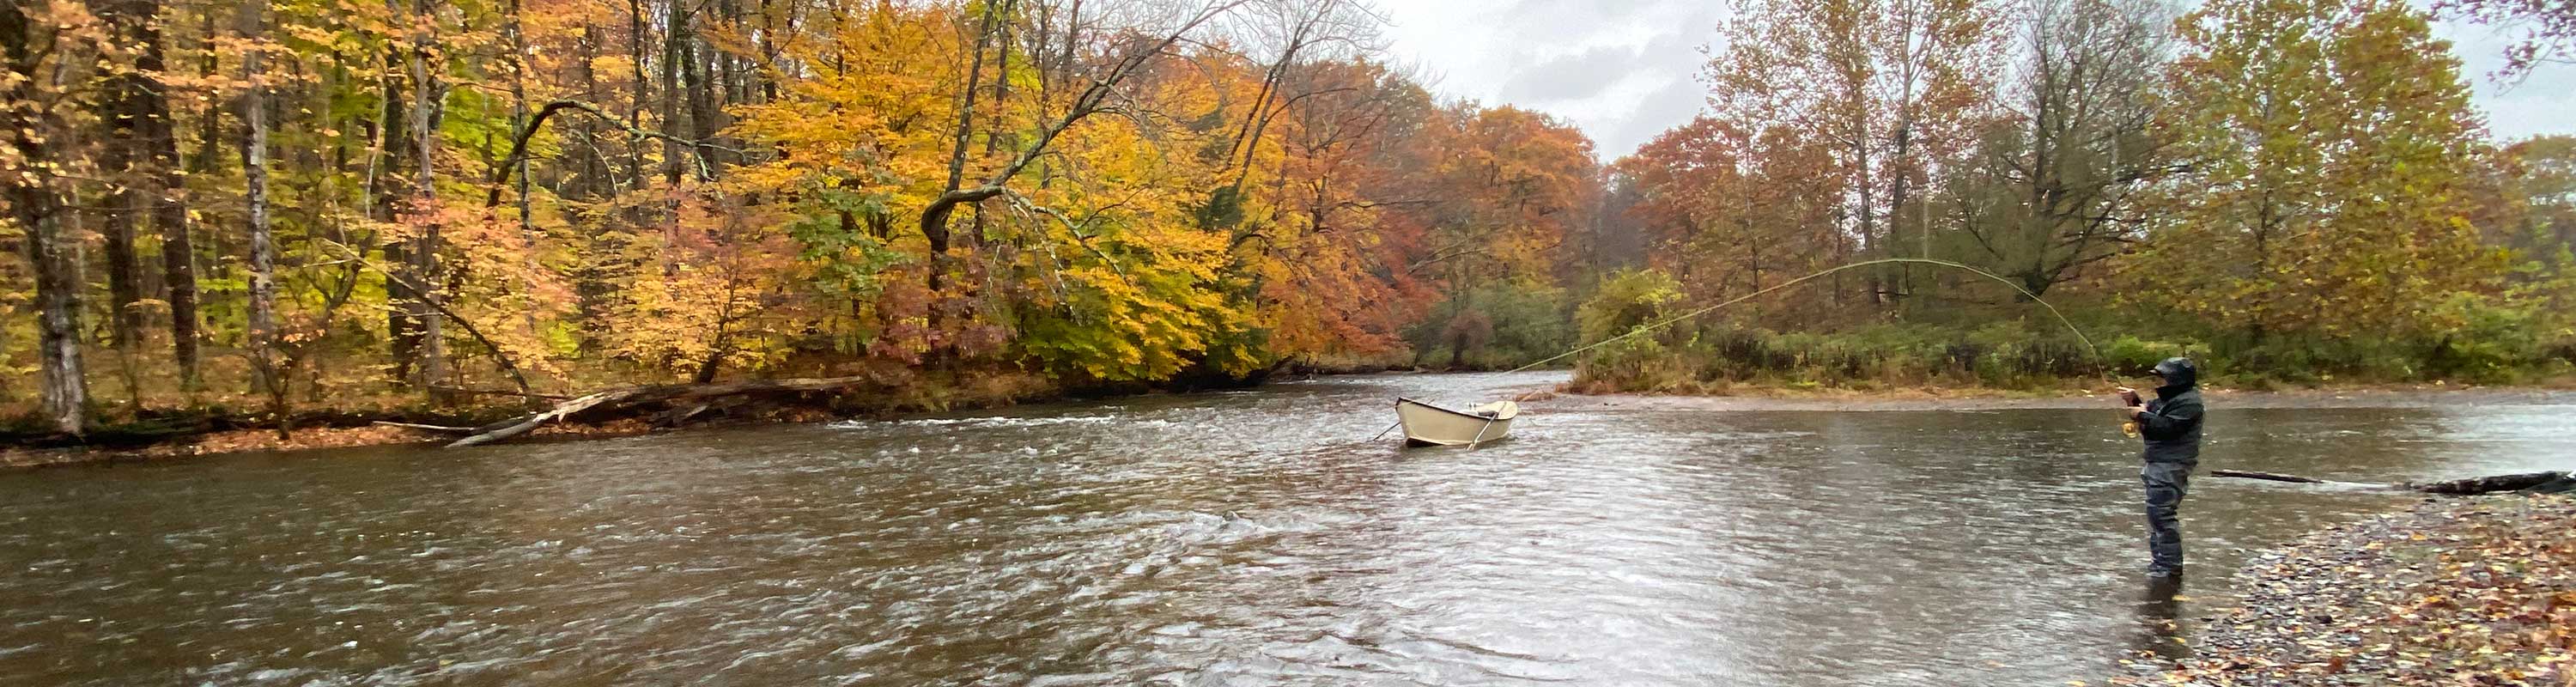 Driftwater Fishing's drift boat and angler in Salmon River in fall